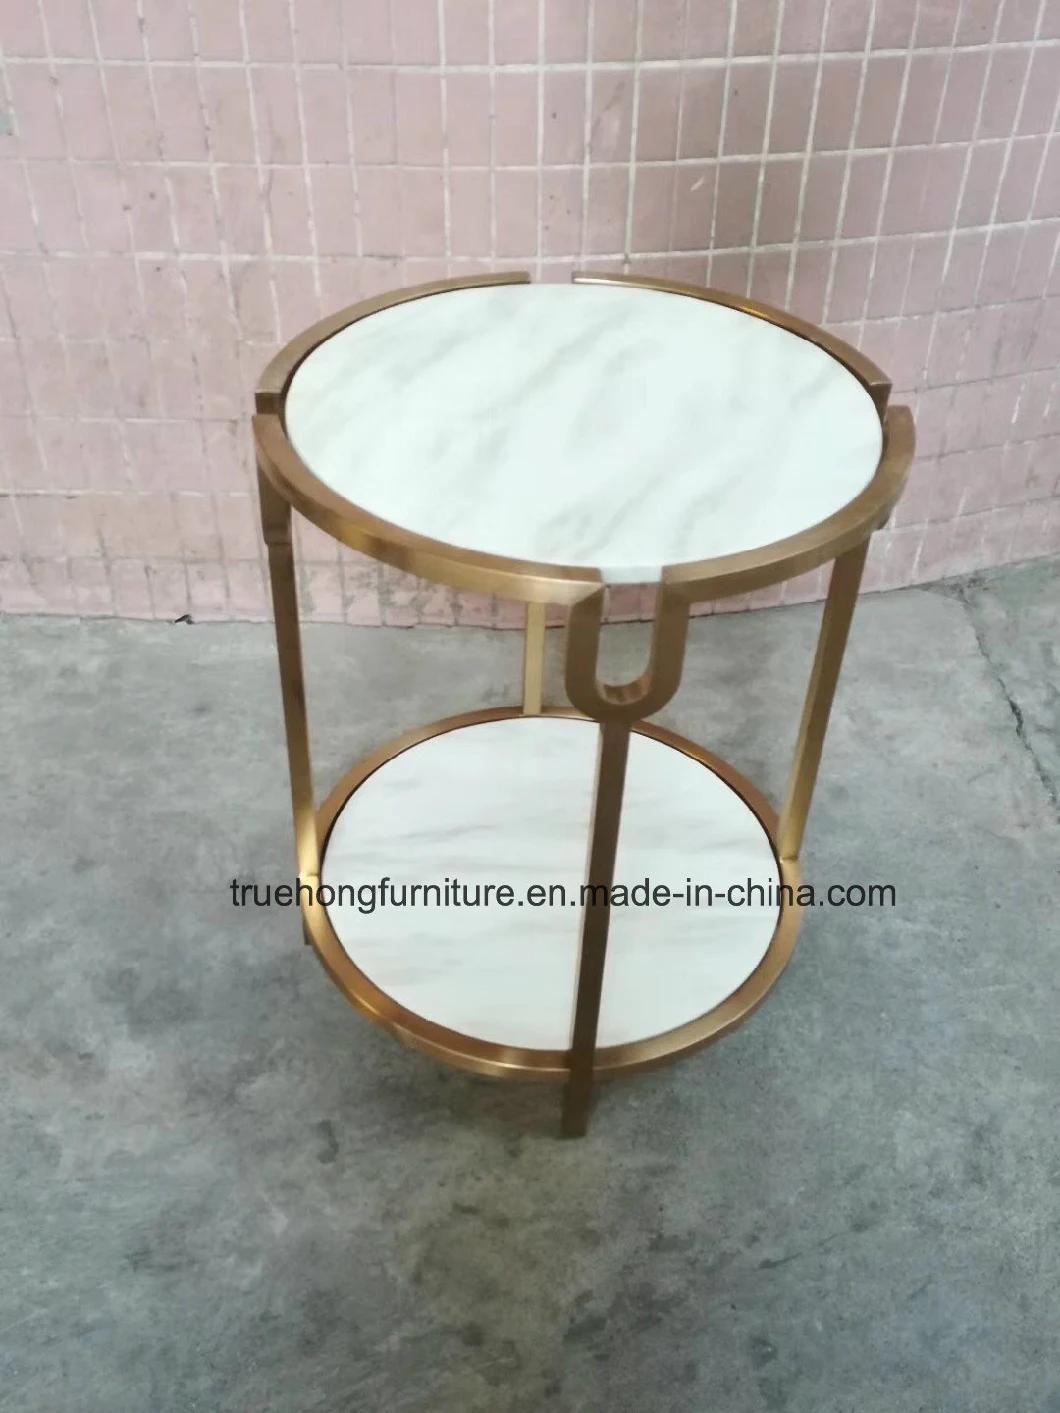 Hotel Contact Furniture Round Cocktail Table Coffee Table Sofa Center Table